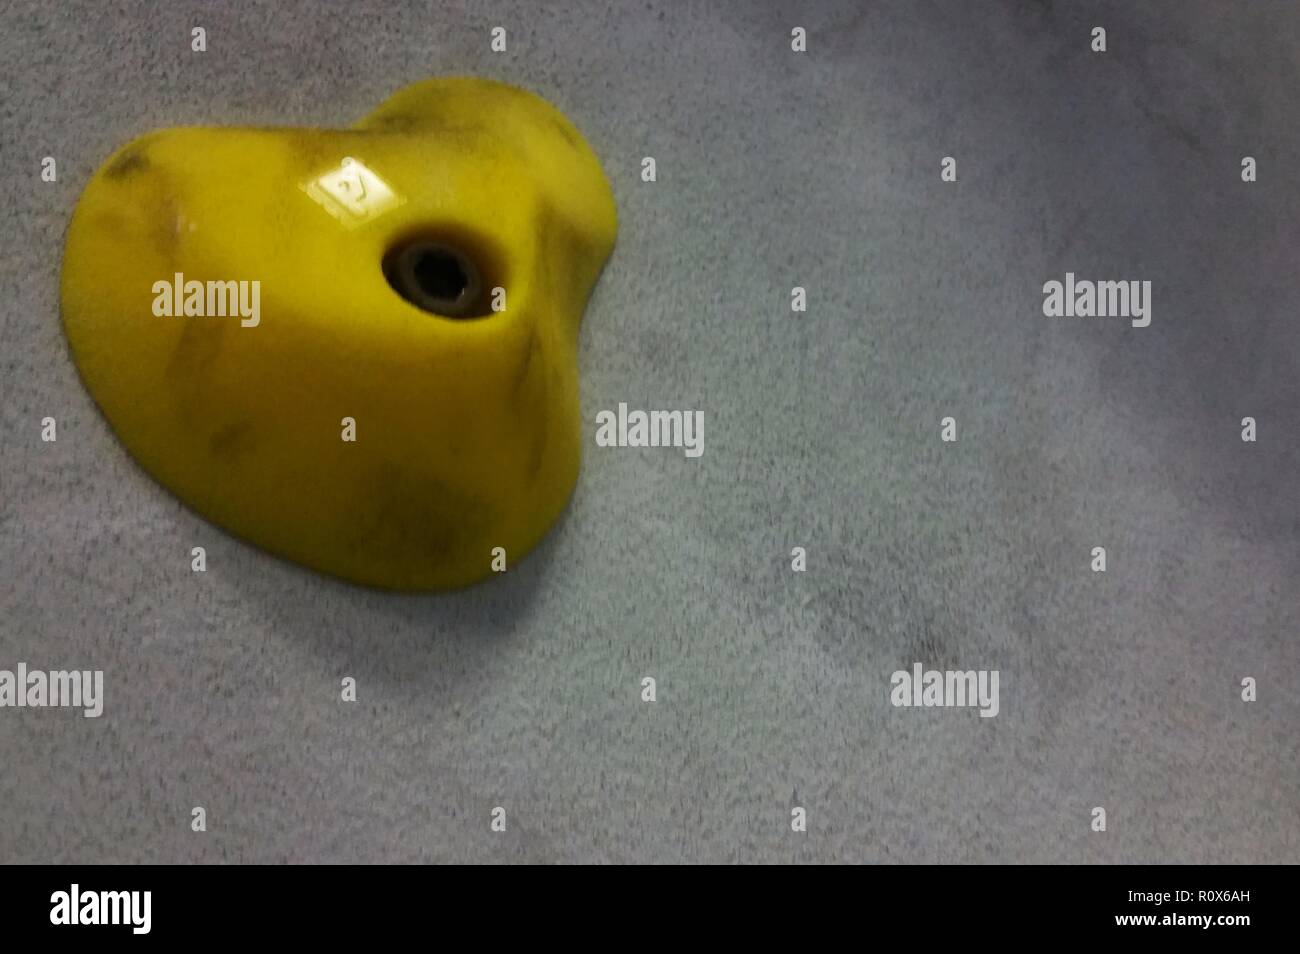 One yellow pincher rock climbing holds against a grey wall Stock Photo